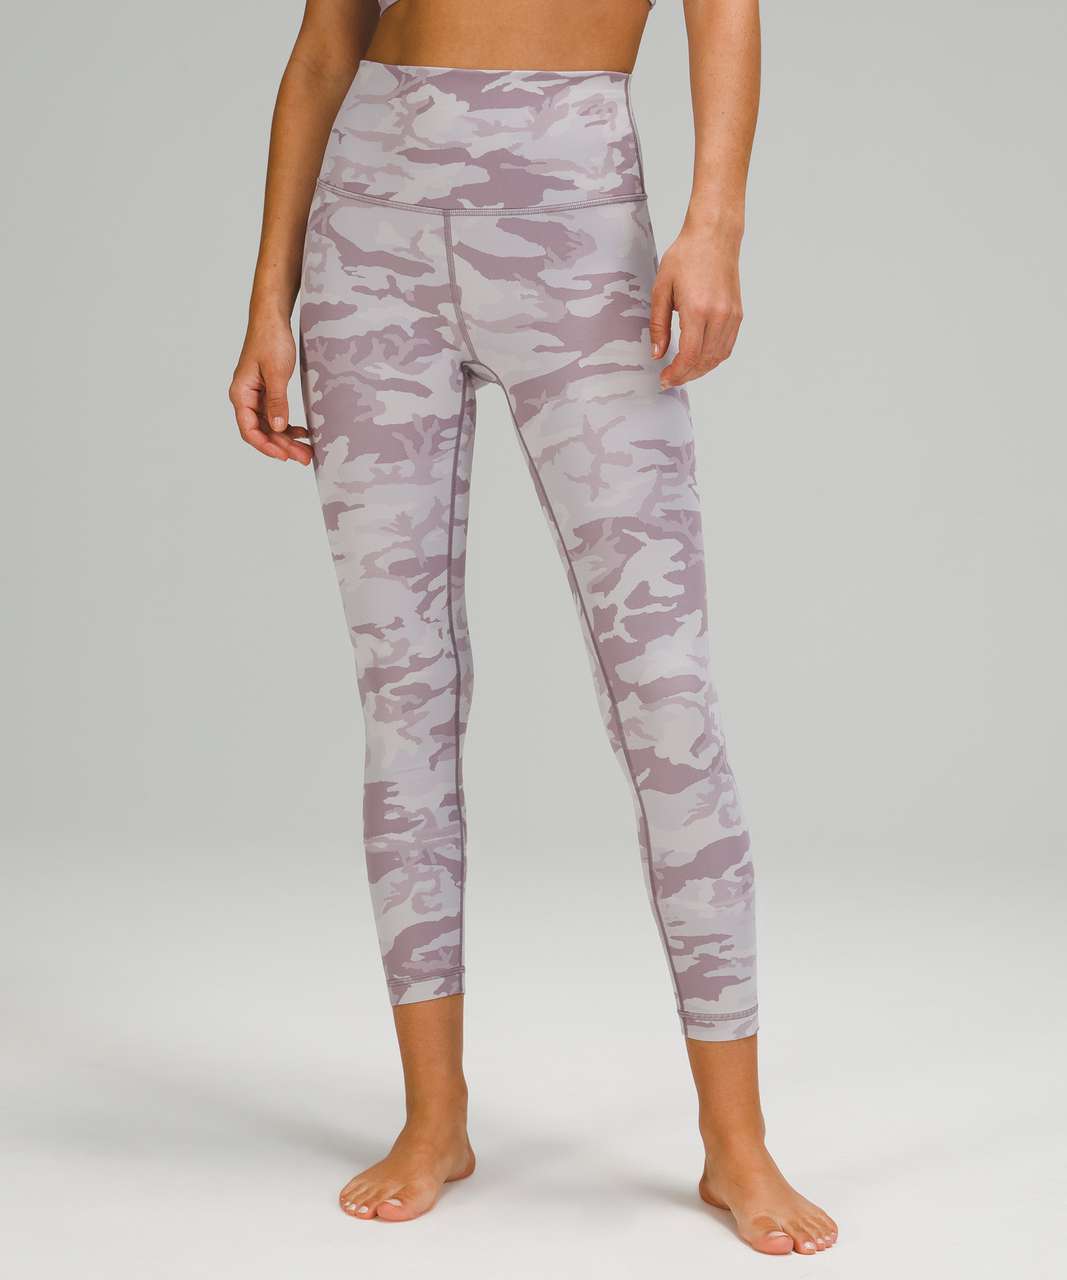 Lululemon Wunder Under High-Rise Tight 25" *Luxtreme - Incognito Camo Jacquard Iced Iris Violet Verbana